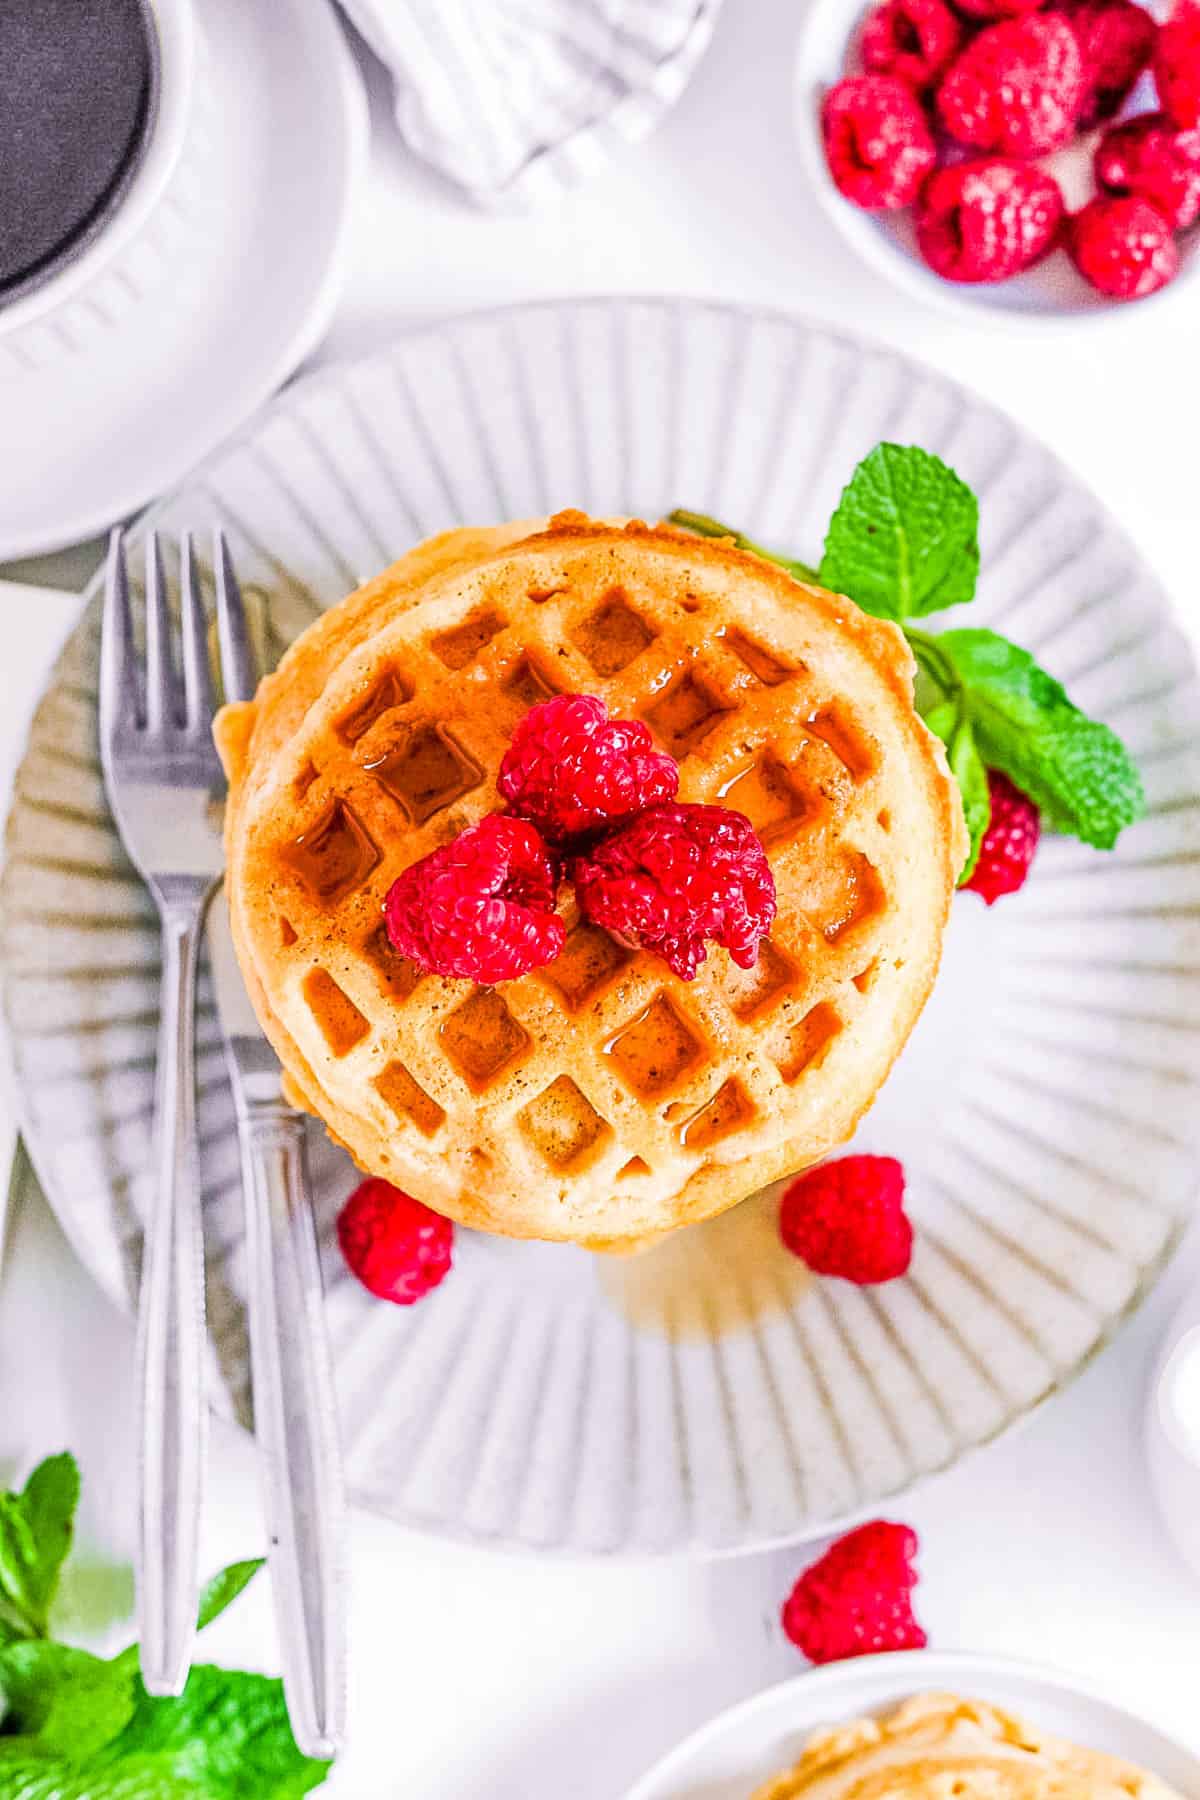 Gluten free vegan waffles stacked on a white plate, topped with raspberries and maple syrup.